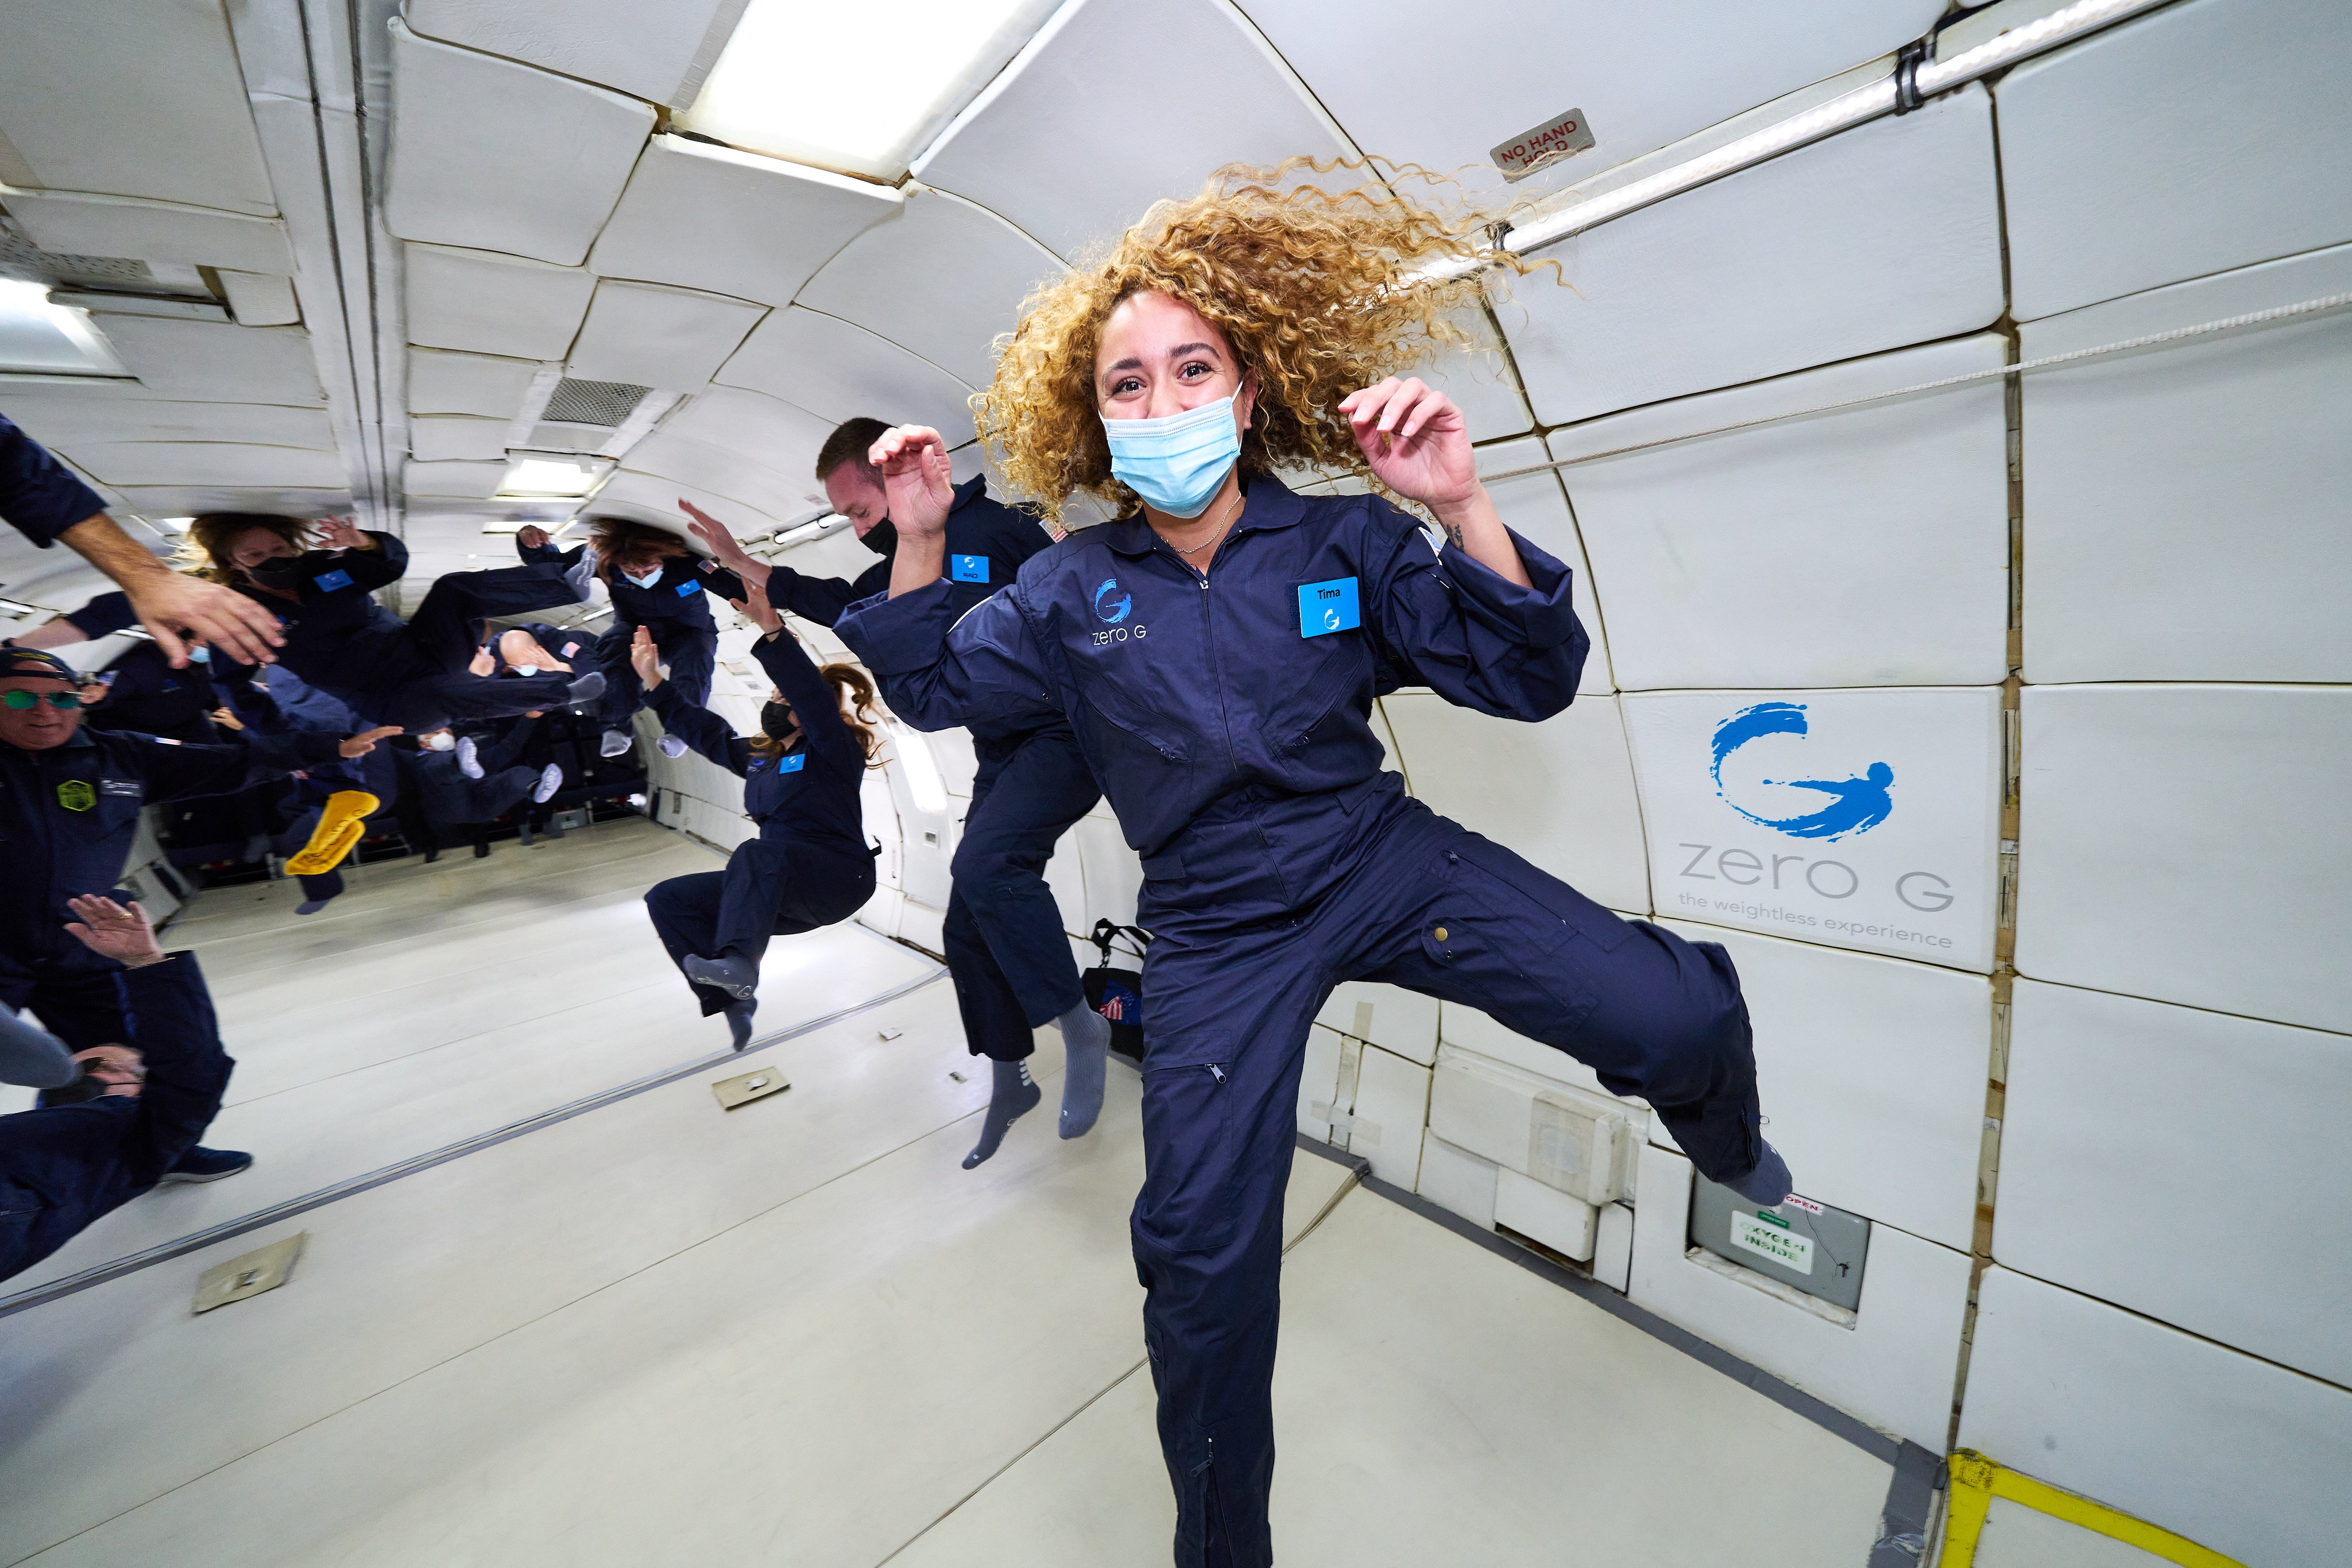 Zero-G on X: #TuesdayTip Wear or bring comfy clothes for under your  flight-suit! While floating, you're going to want to be comfortable.  Athletic clothes appropriate for the weather are best because they